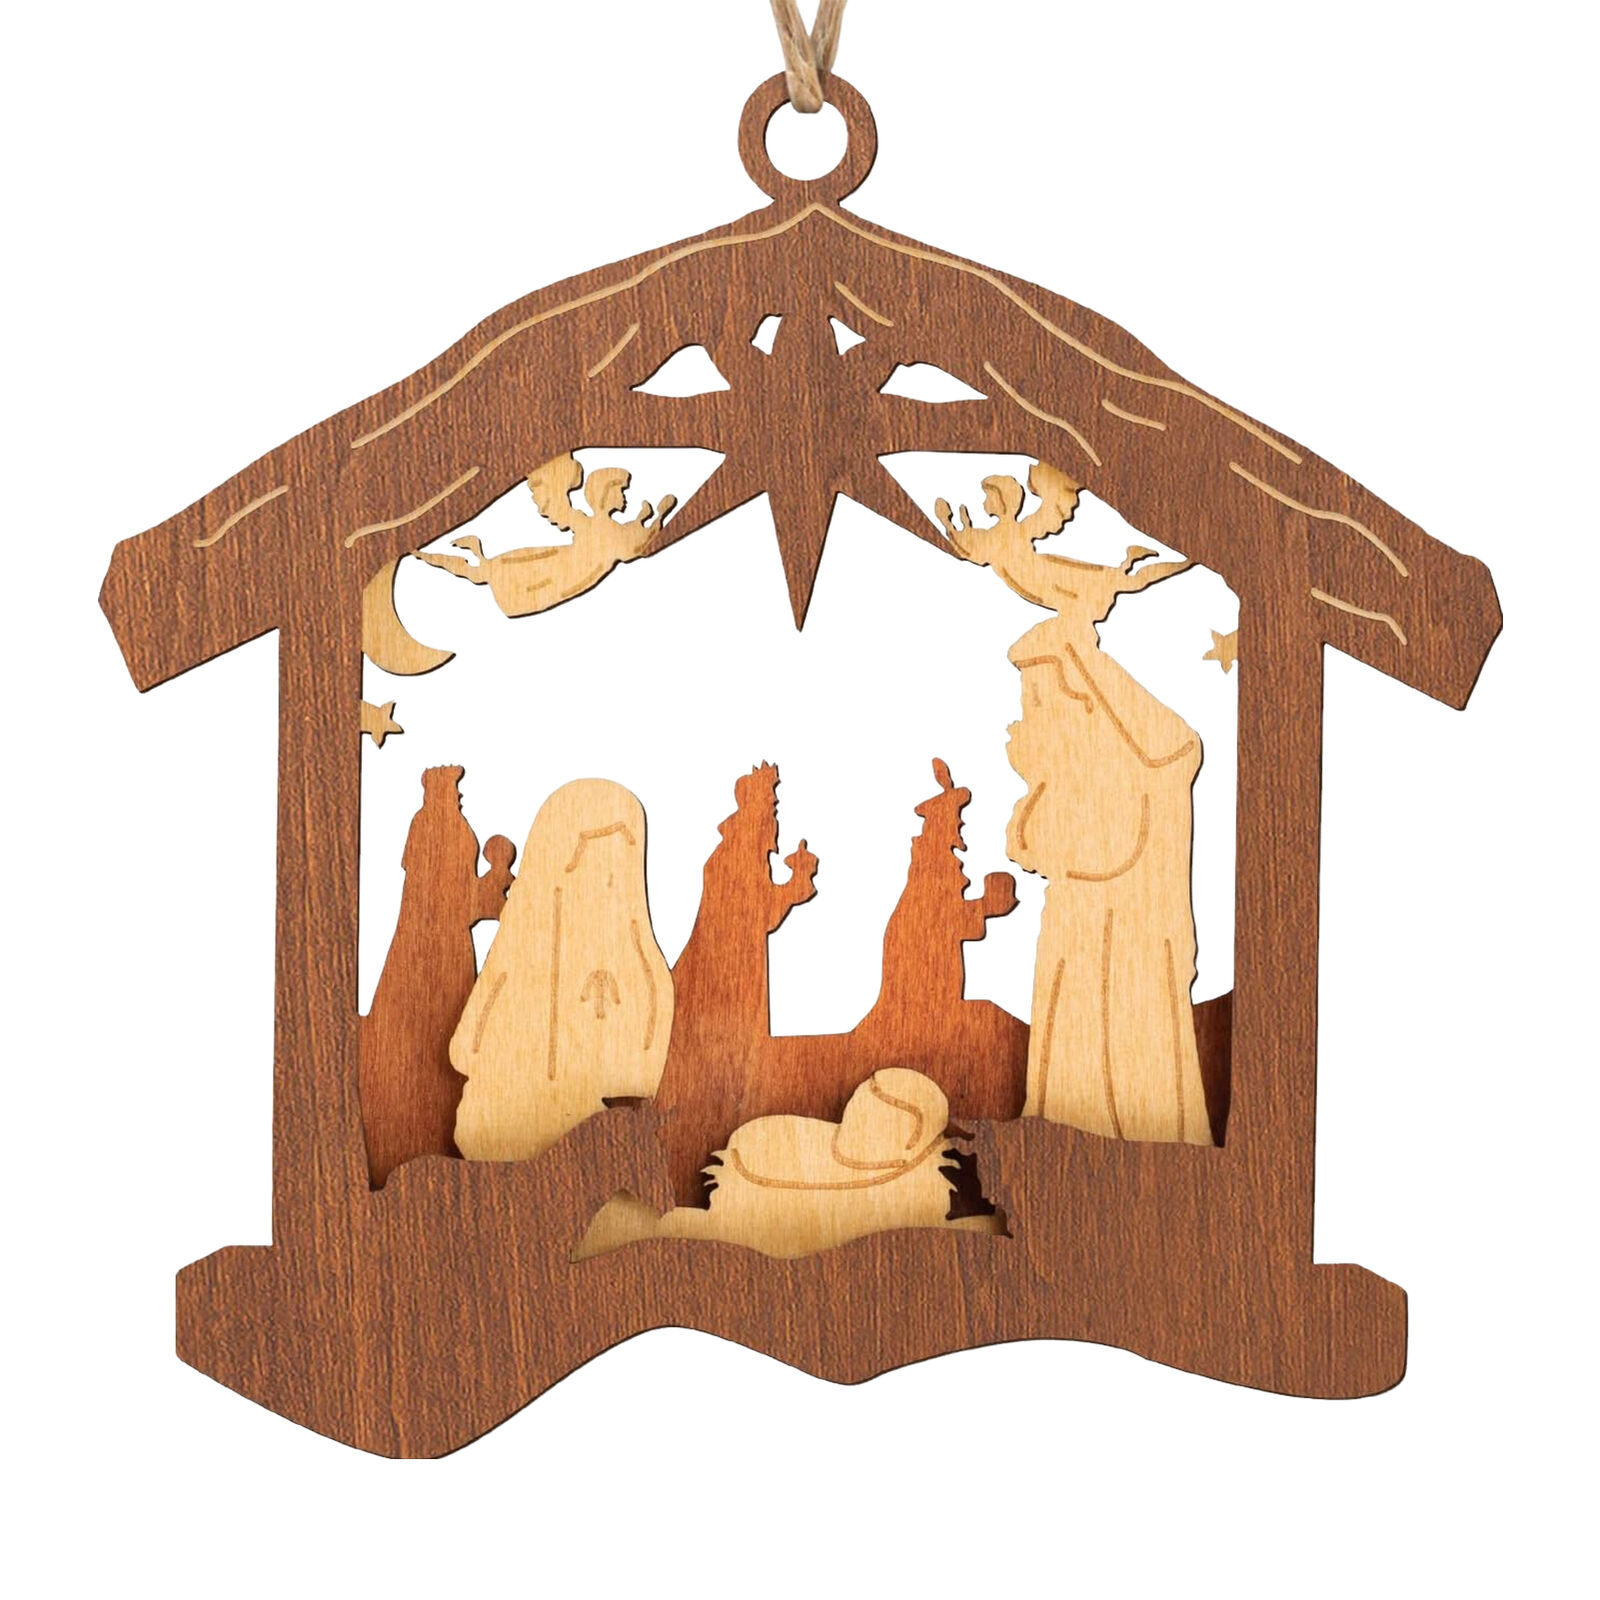 Nativity Christmas Tree Ornaments Wooden Christmas Hanging Ornament Present 